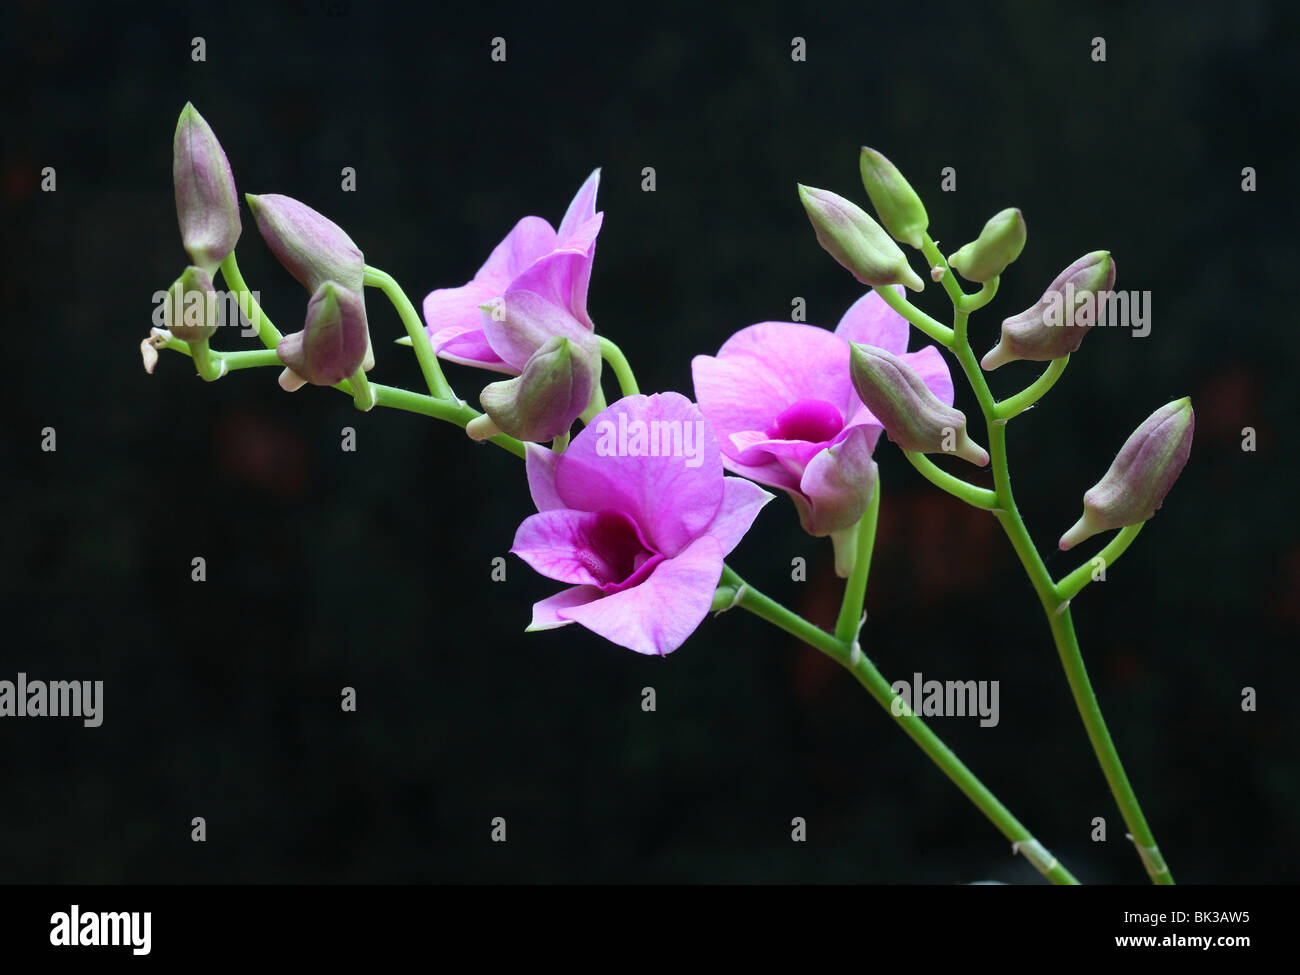 Dendrobium Orchid flower Stock Photo